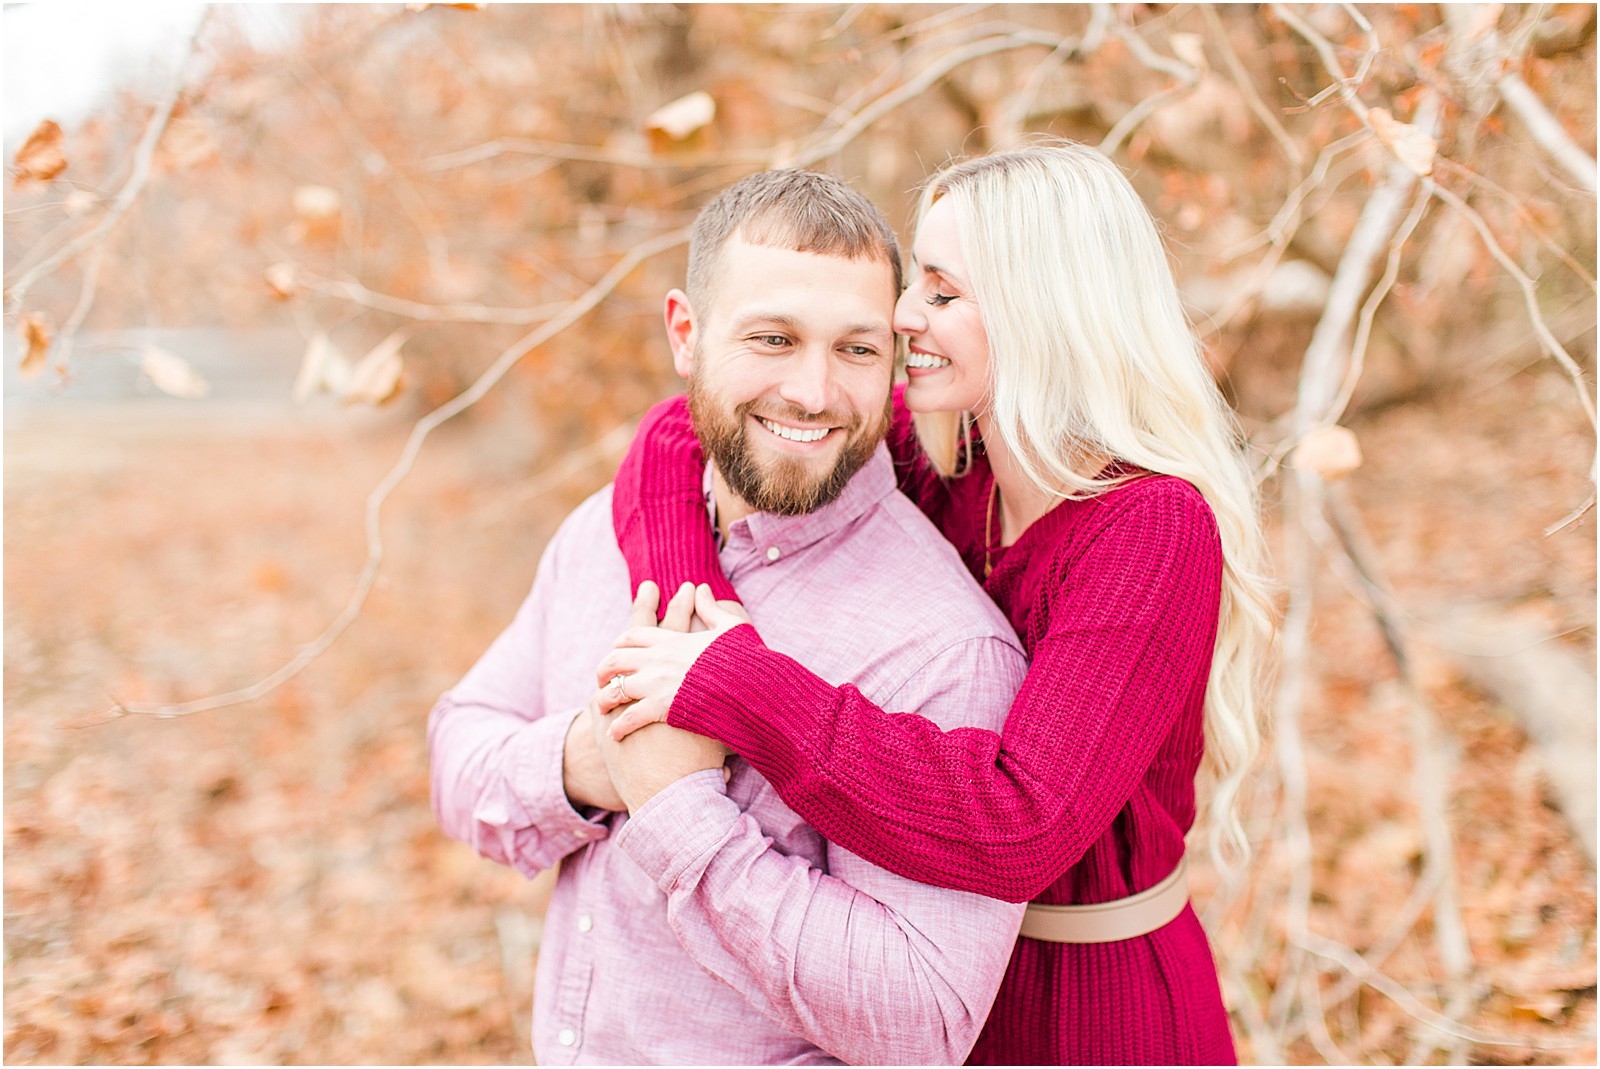 An sweet and snuggly fall anniversary session in Loogootee, Indiana. | #anniversarysession #fallsession #southernindianawedding | 017.jpg